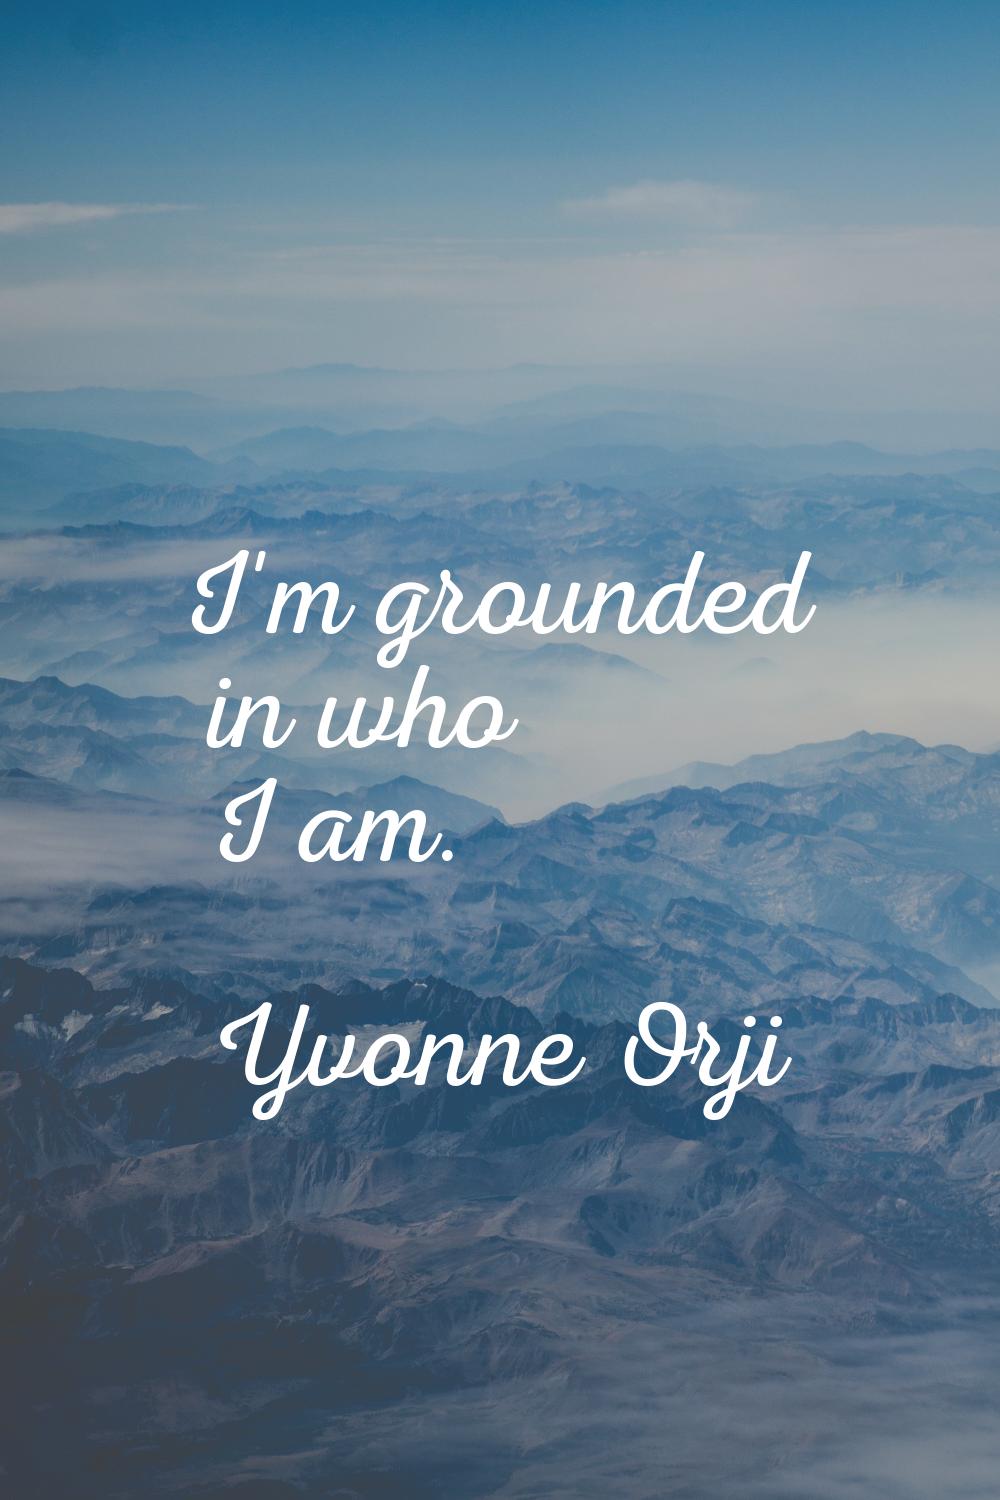 I'm grounded in who I am.